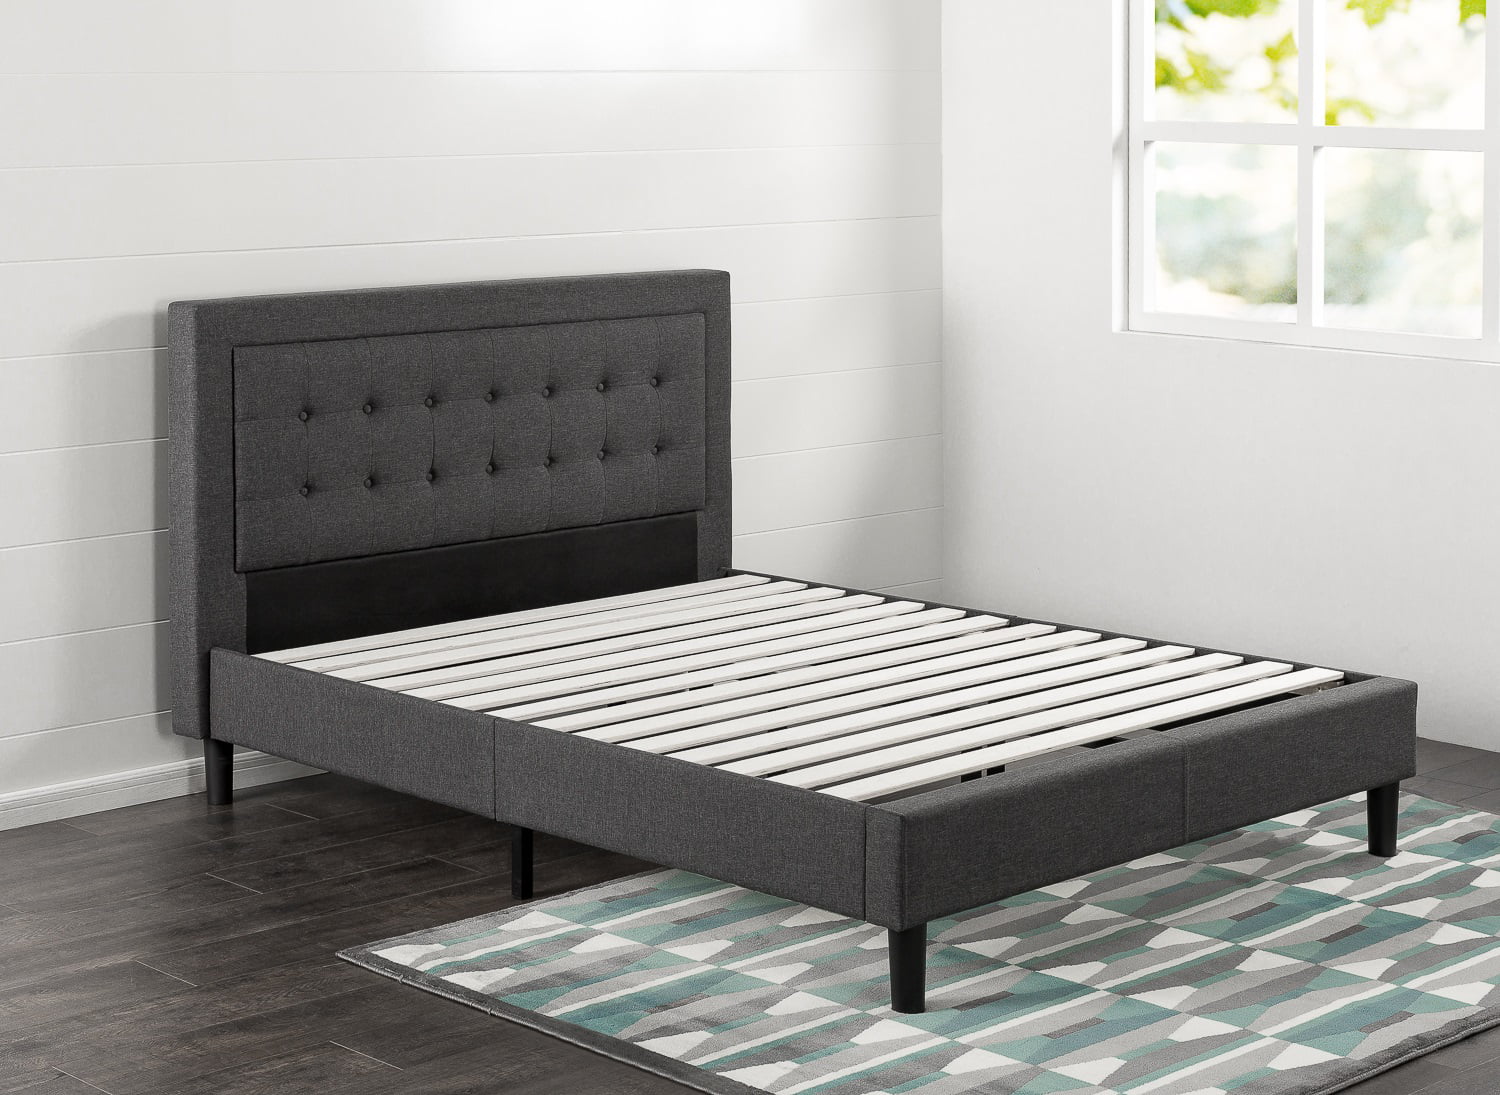 Beds Frames And Bases Zinus Upholstered Button Tufted Platform Bed With Wooden Slats Queen Beds